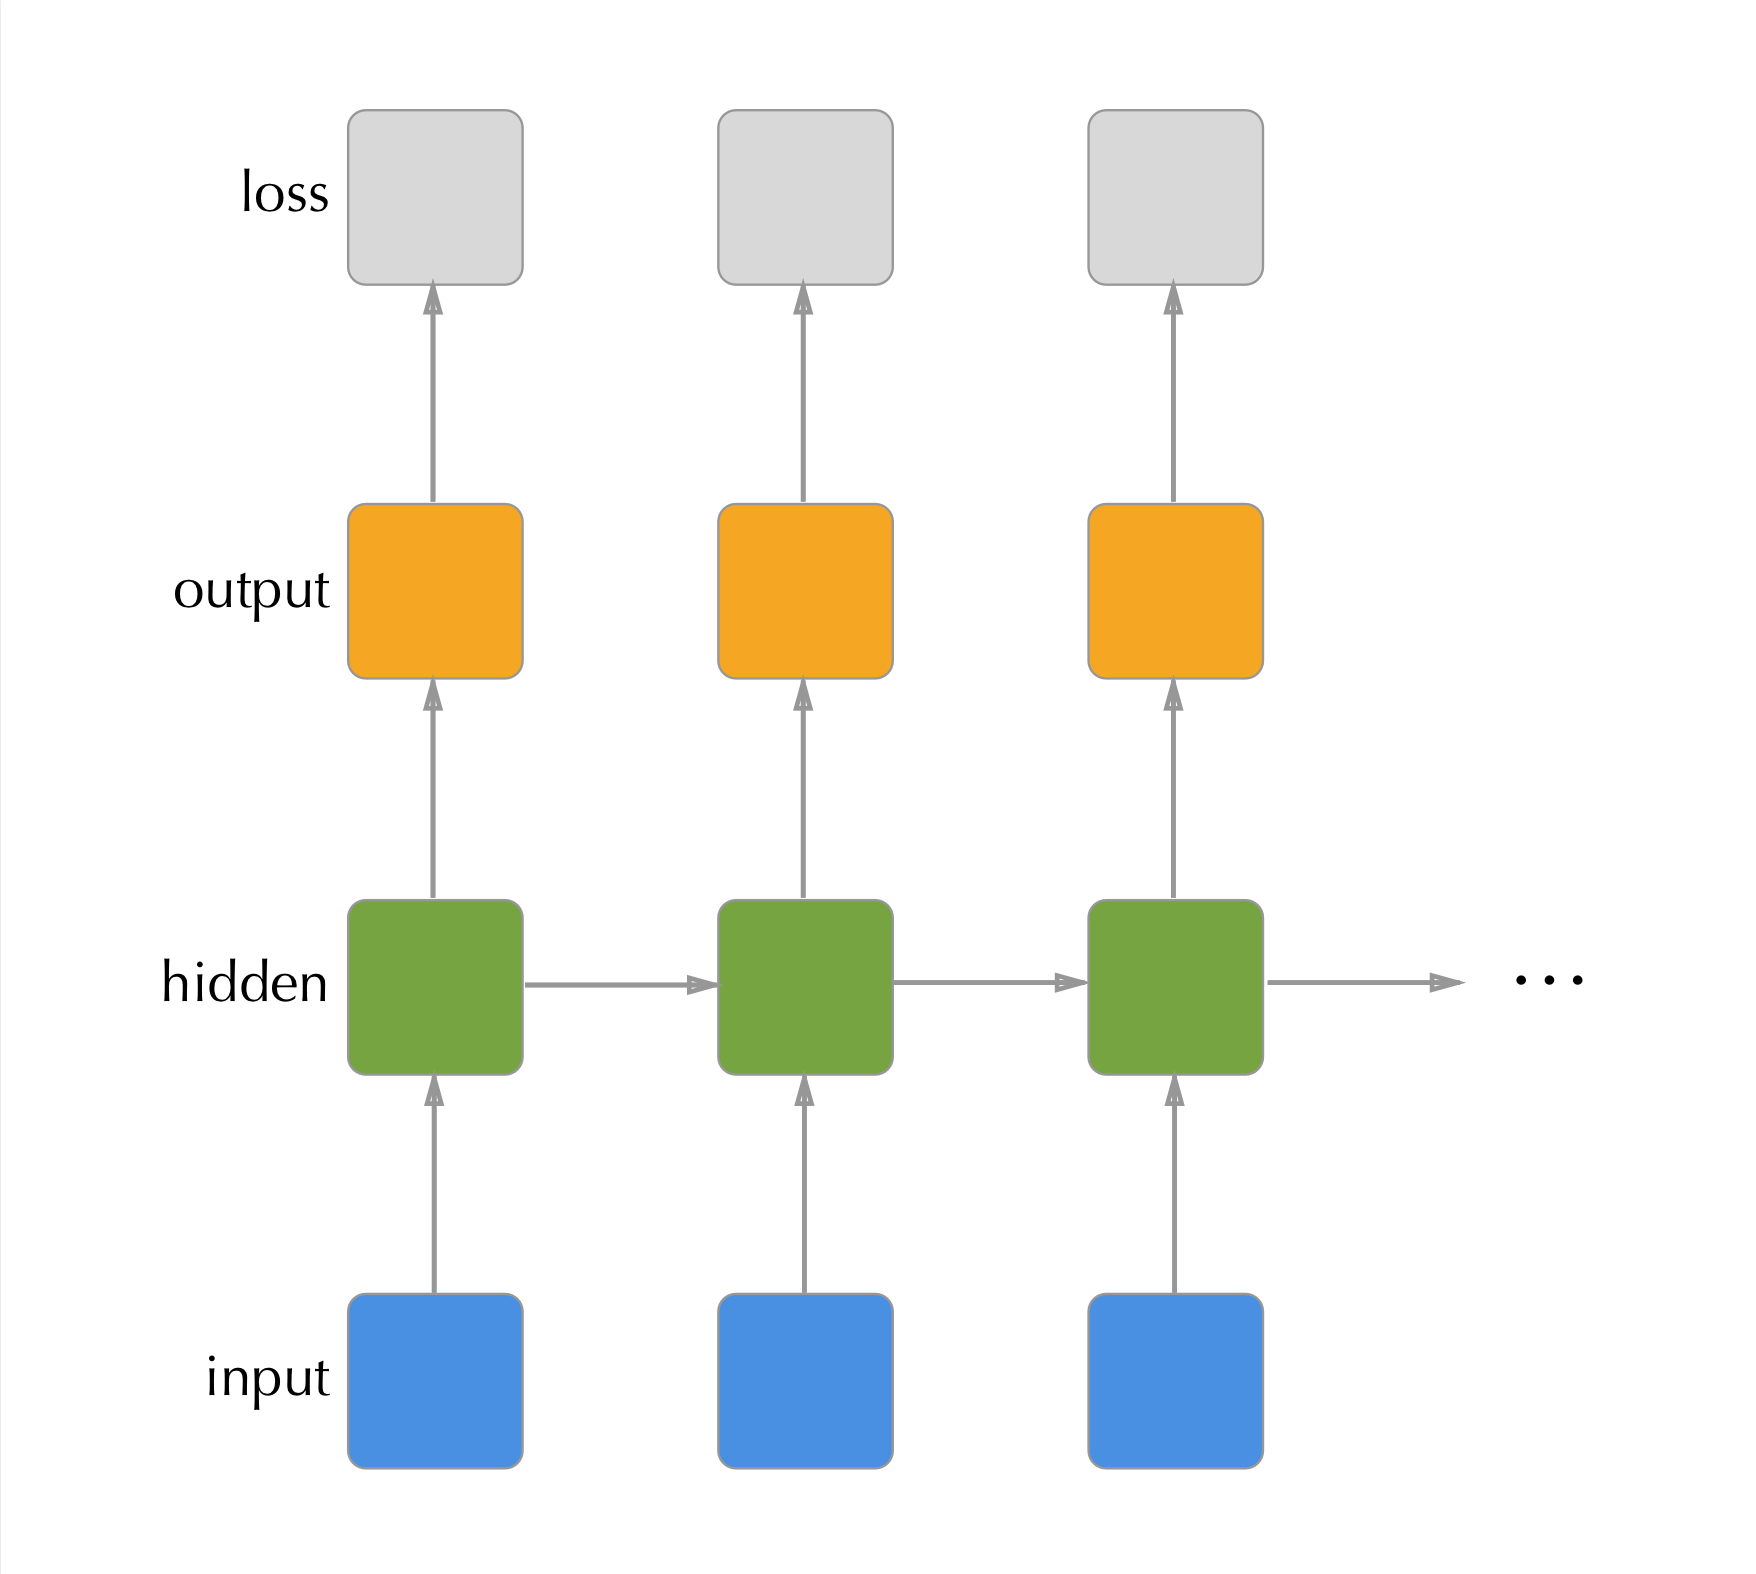 Unrolled view of the RNN shown in previous figure. Each timestep has two outputs, the timesteps predictions and its hidden state. The next time step subsequently has two inputs: the data at the timepoint and the previous timepoint's hidden state.